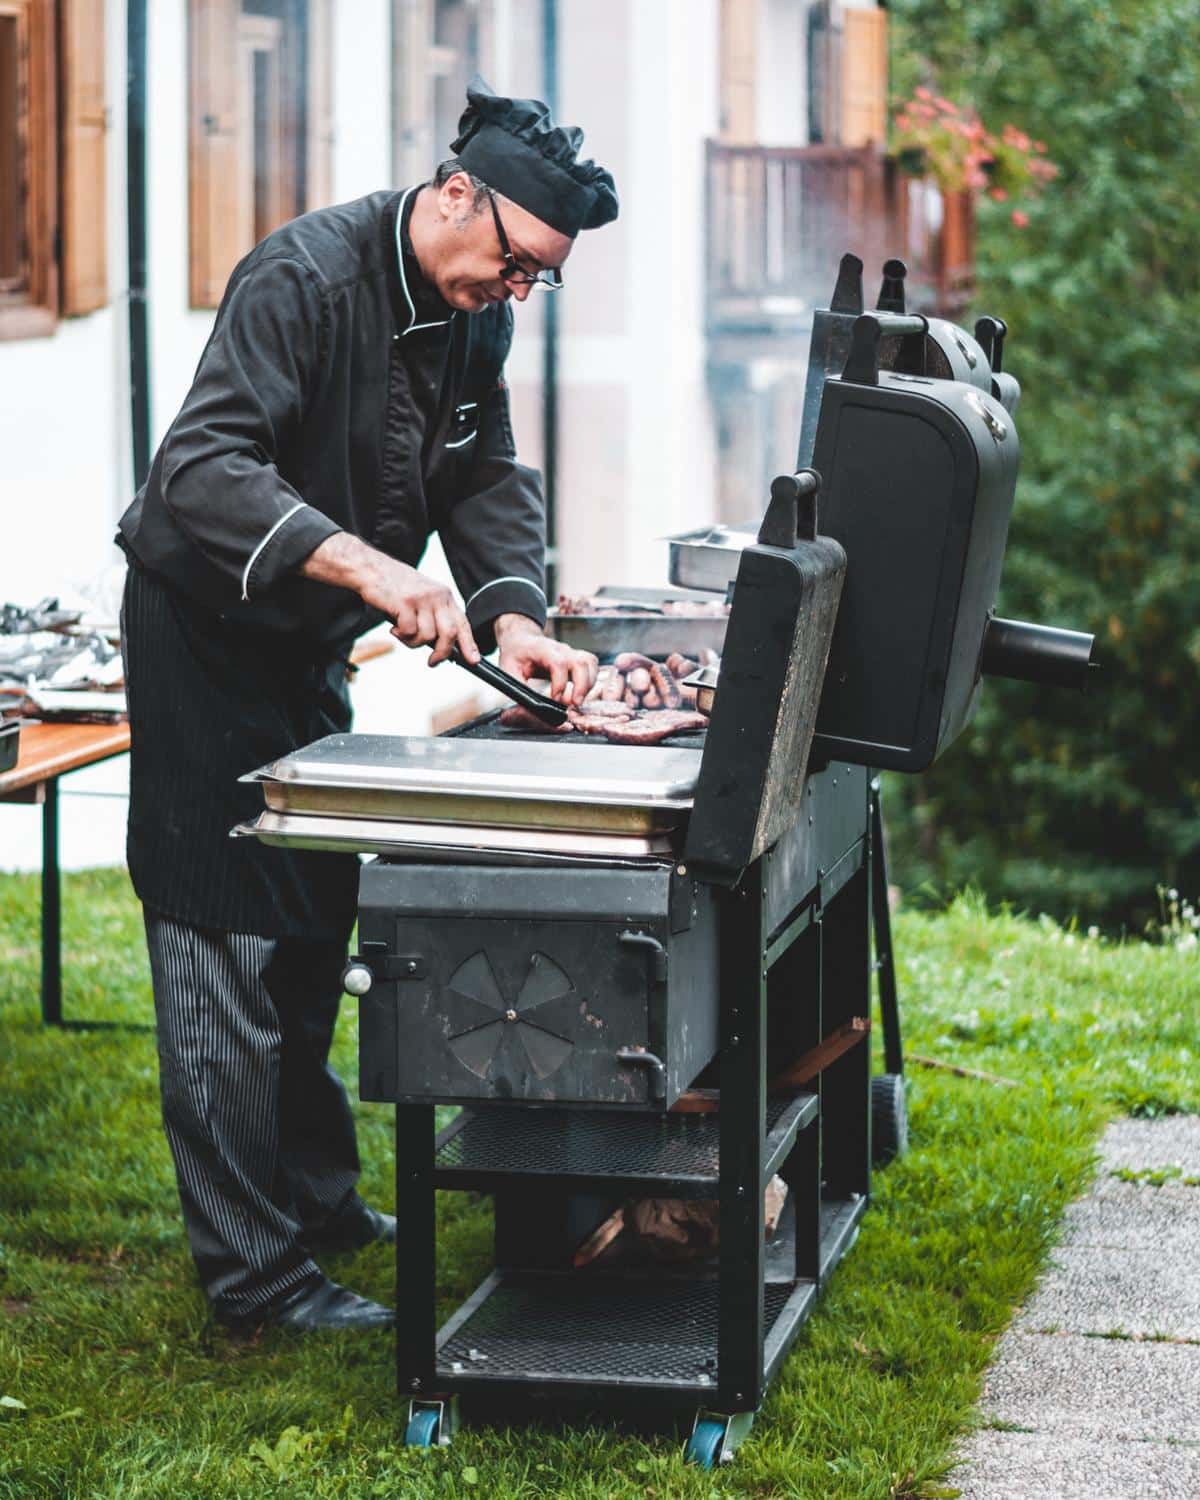 Image depicting a chef grilling with indirect heat on a barbecue